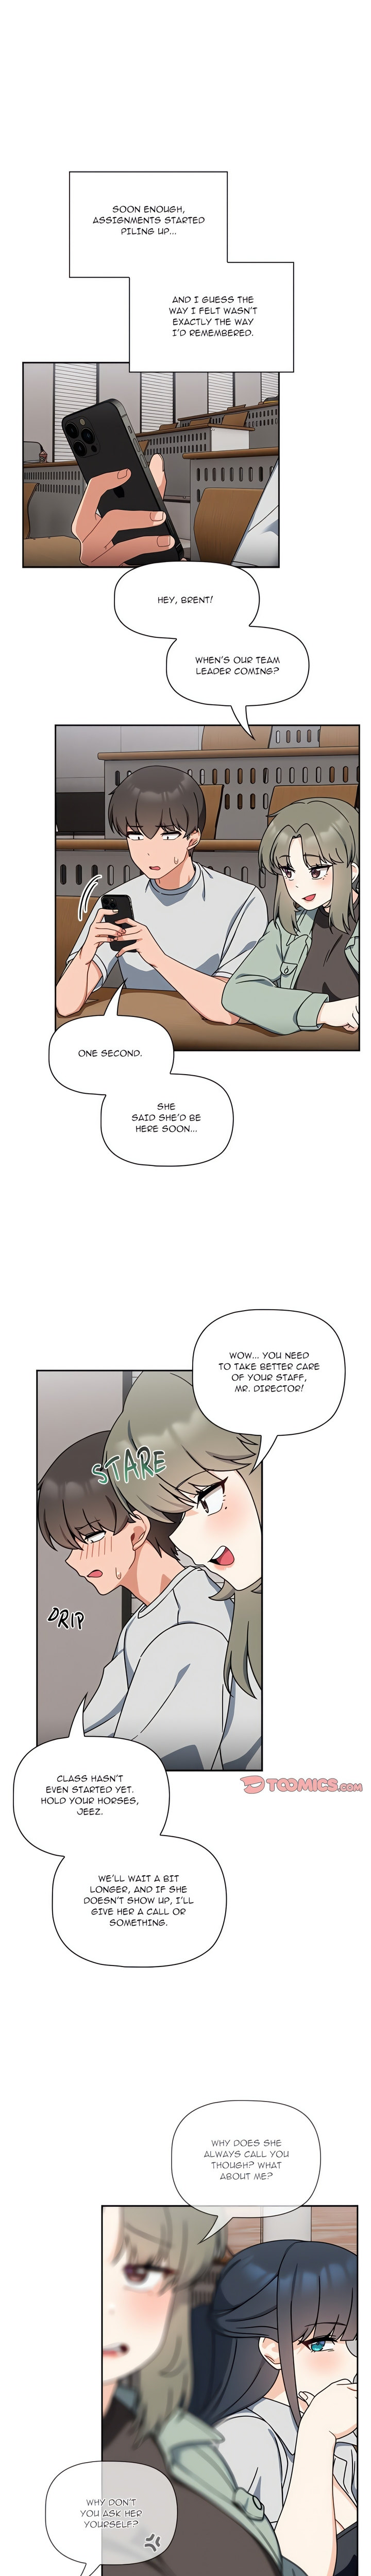 #Follow Me Chapter 40 - Page 14